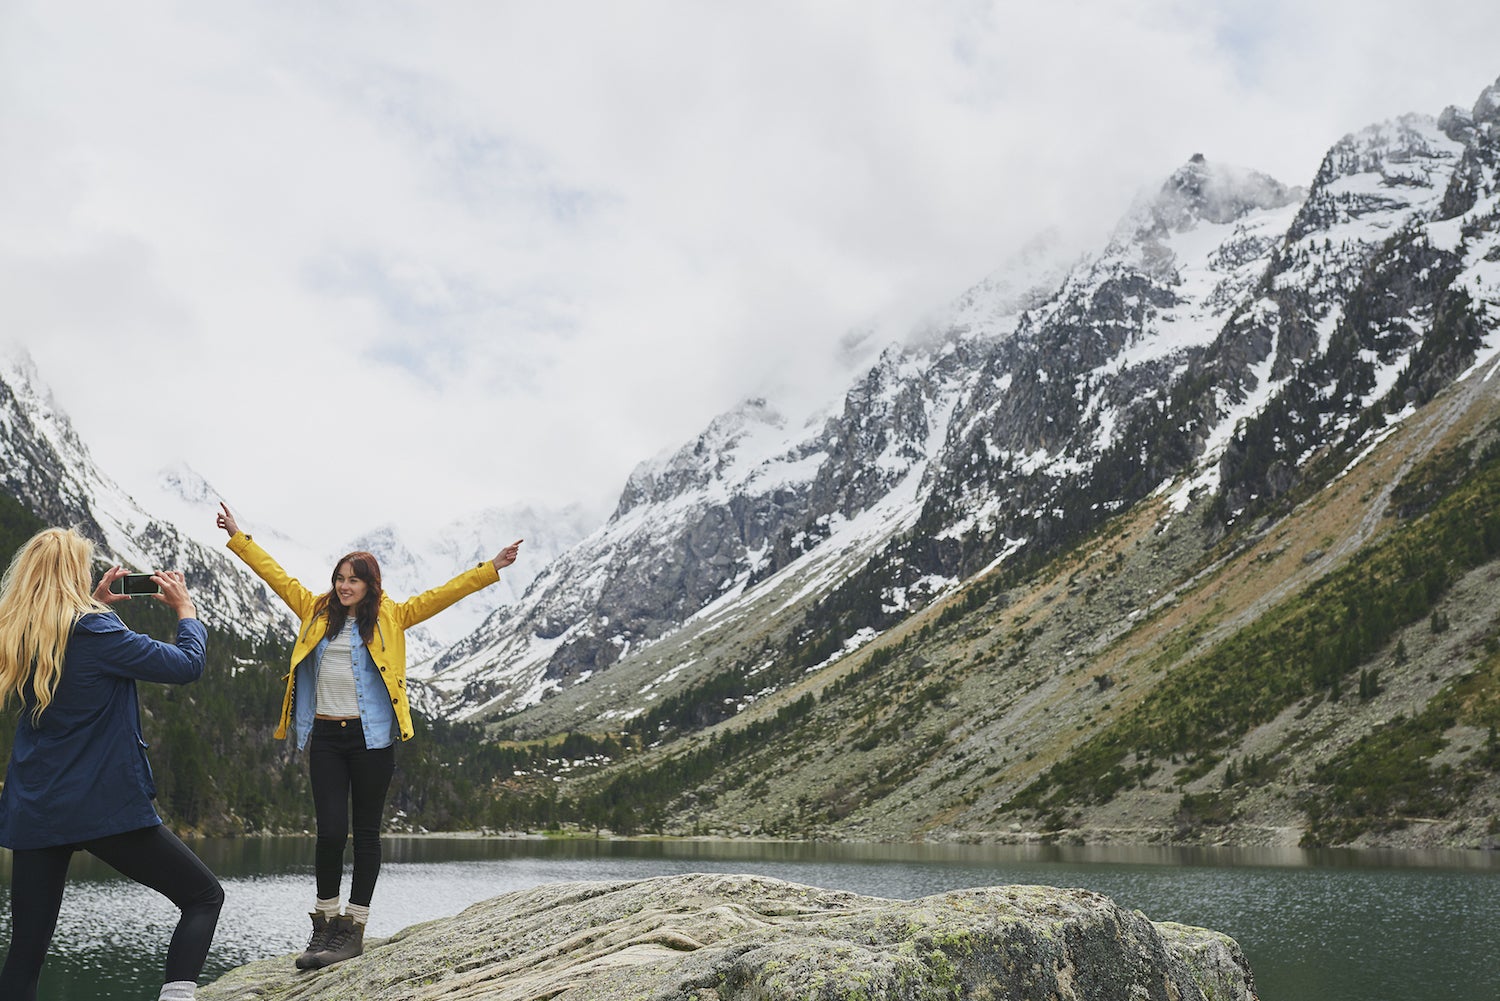 girl photographs friend in front of an alpine lake on leave no trace trip